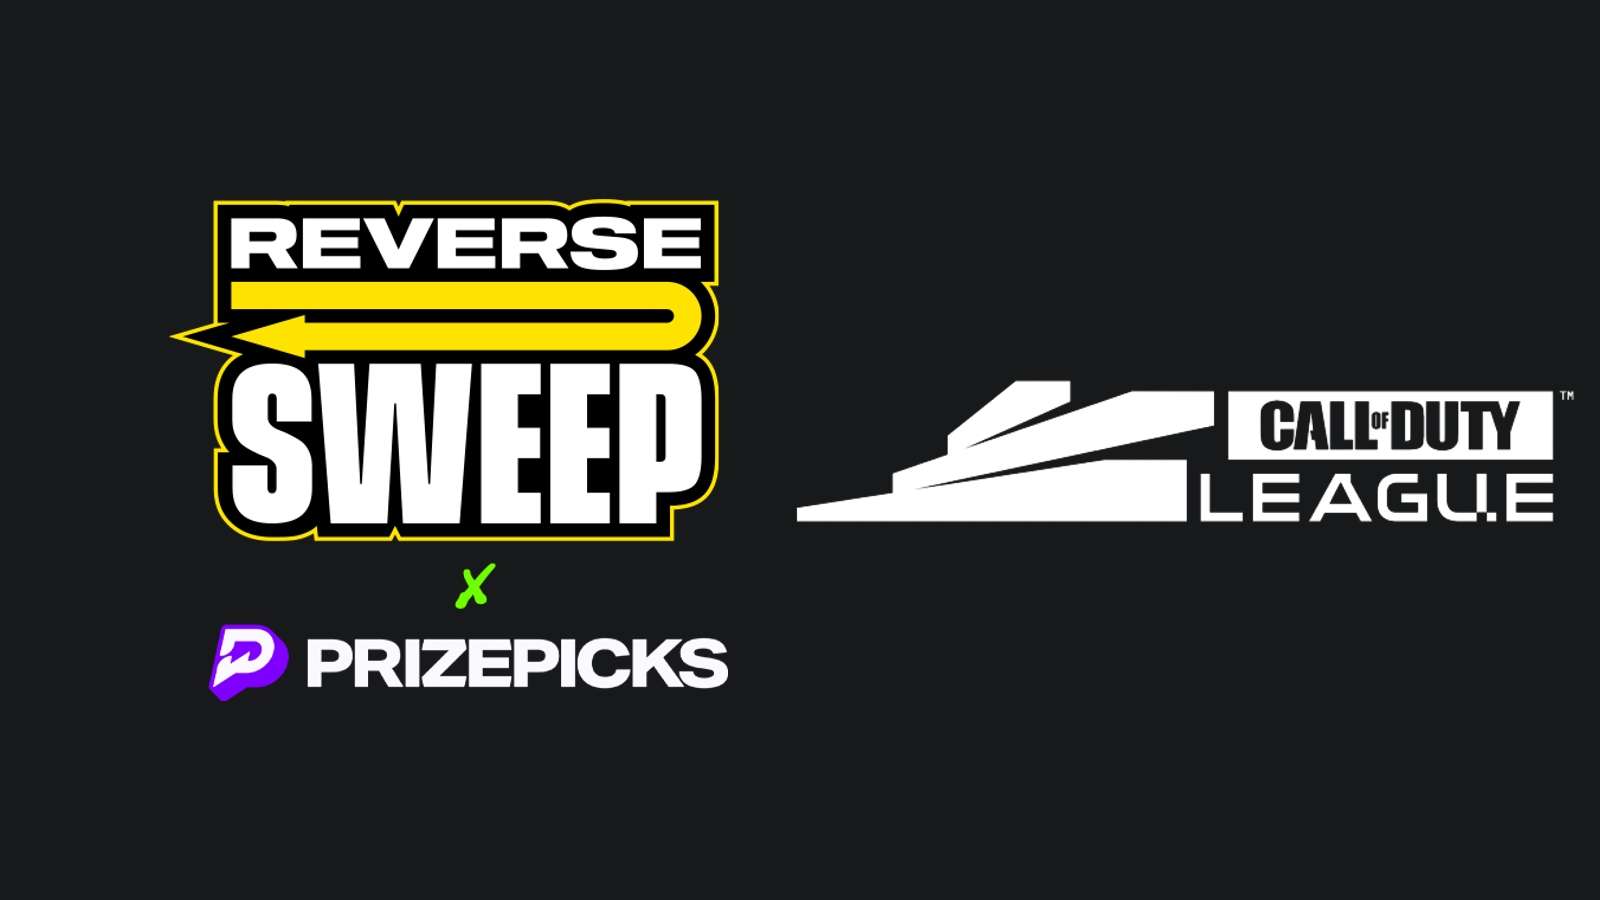 Reverse Sweep x PrizePicks Call of Duty League logos